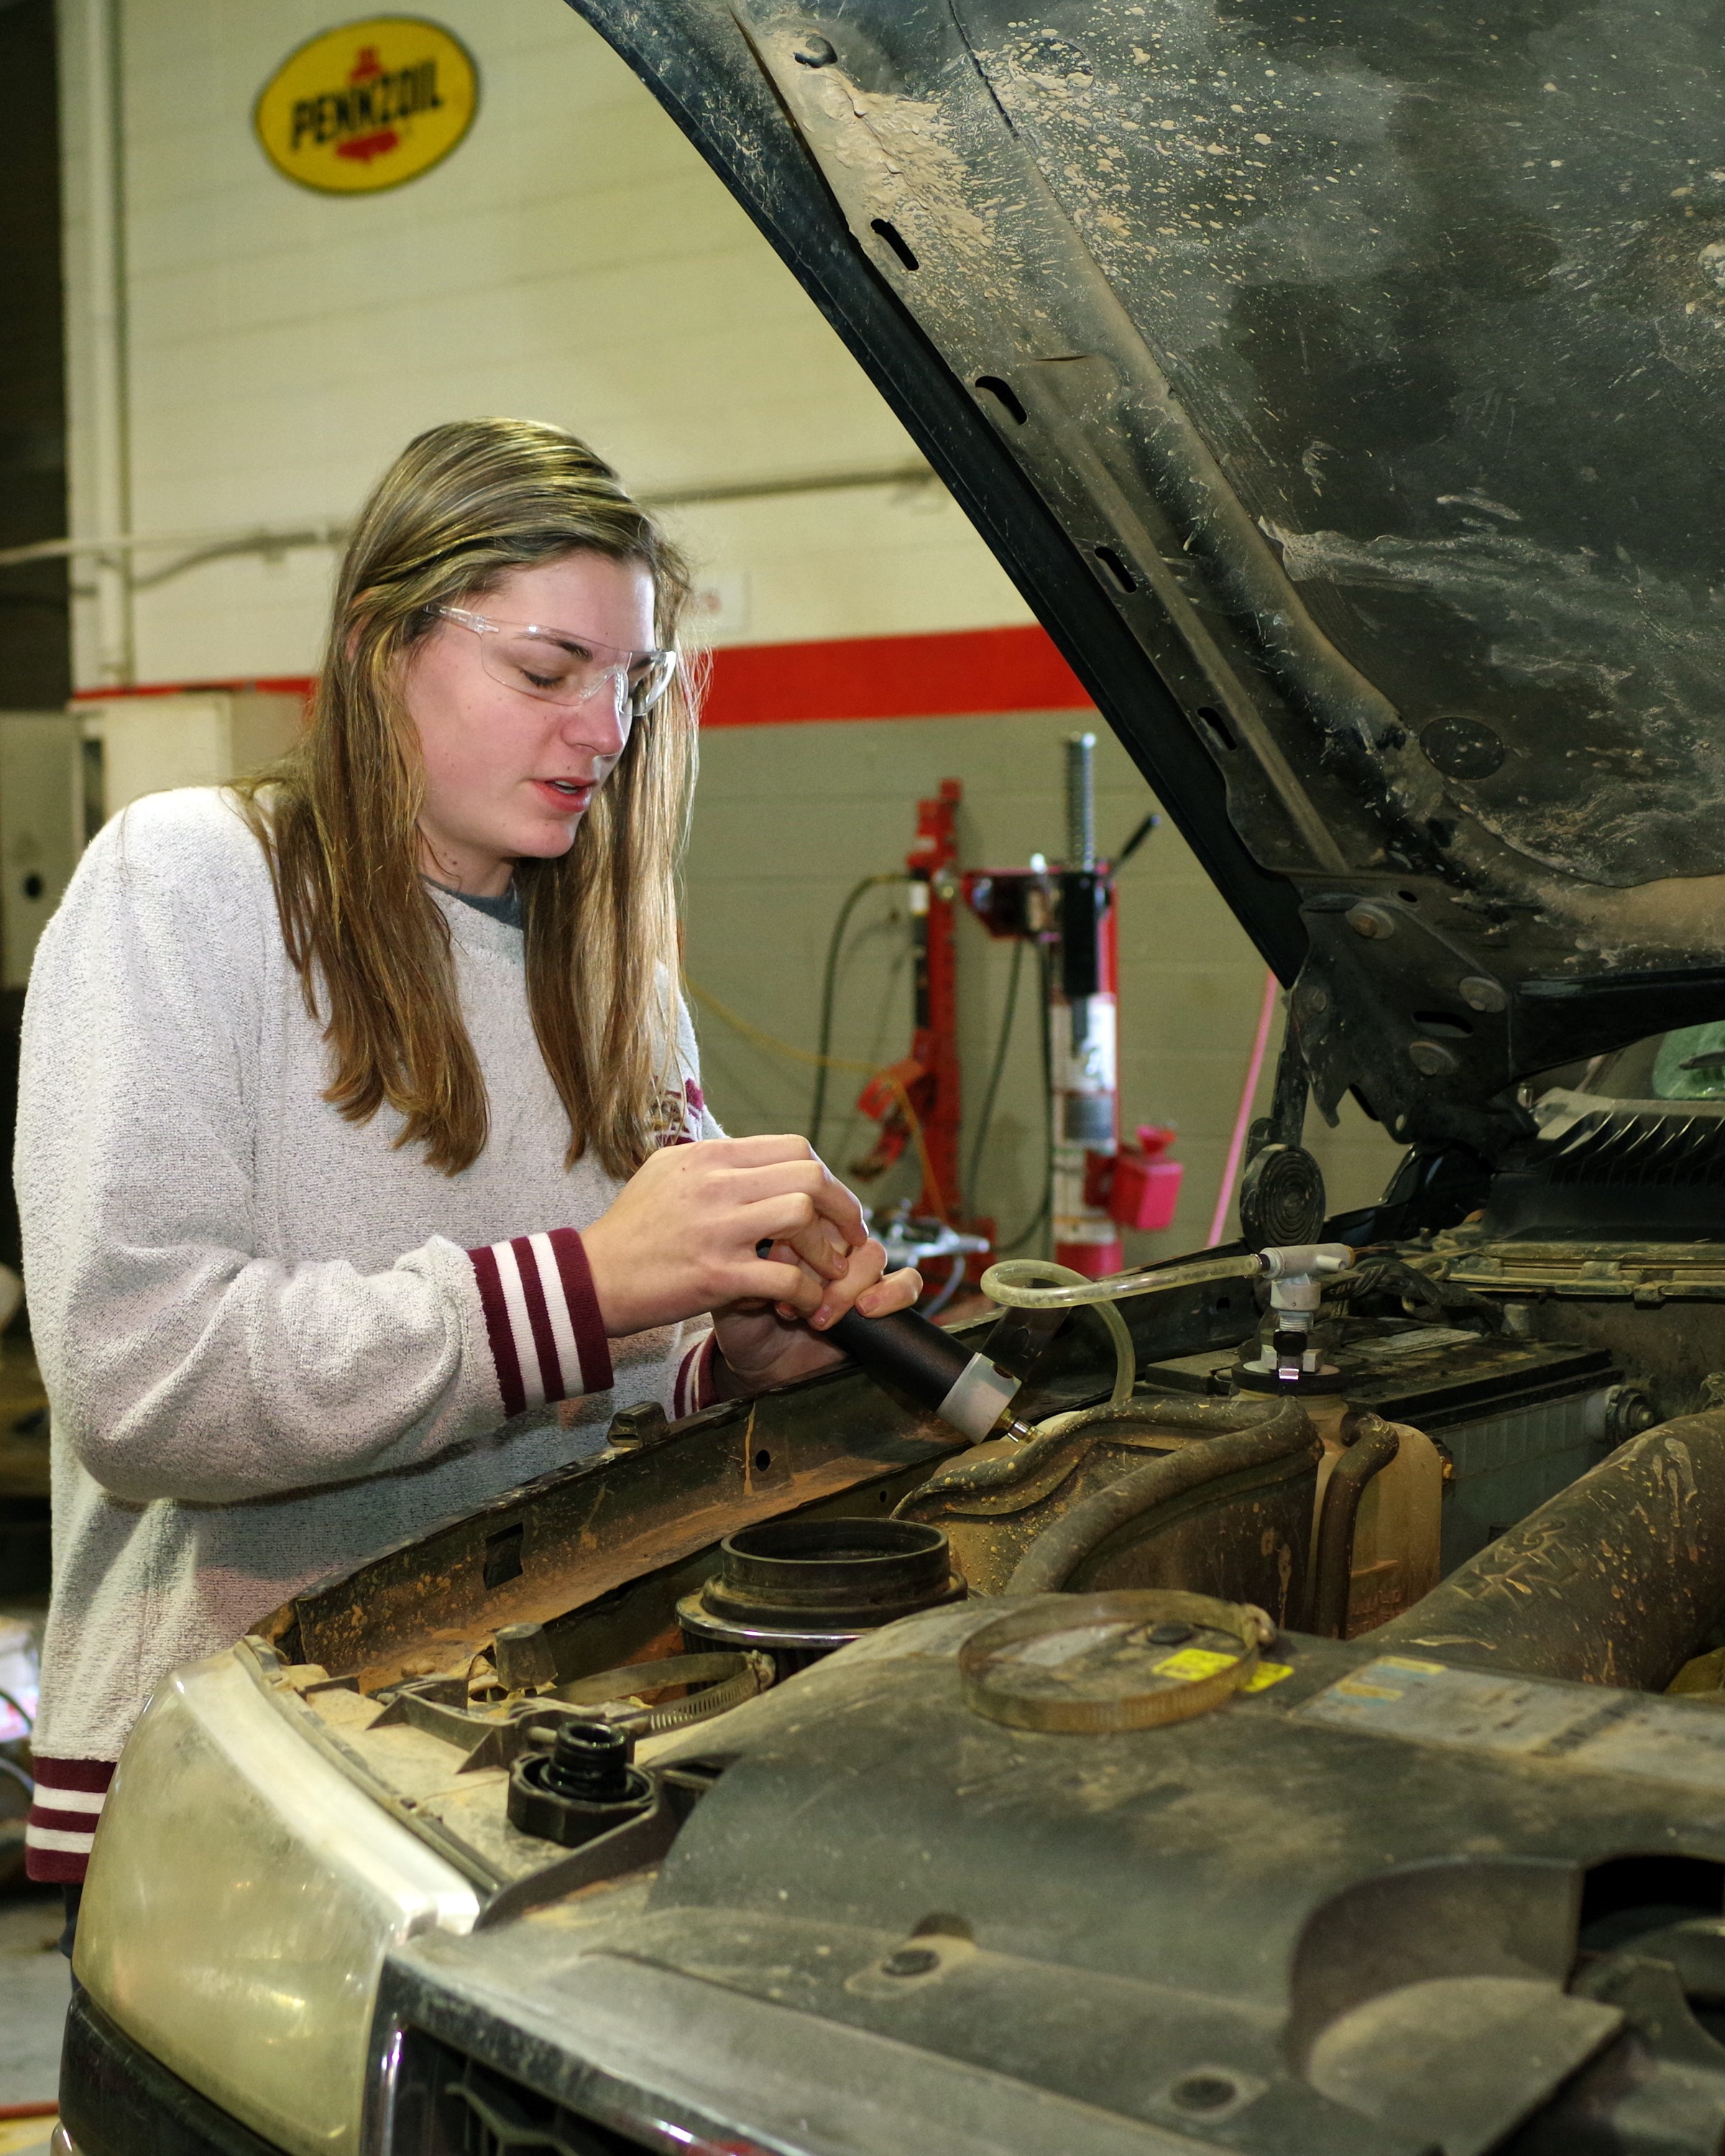 Female Student working on an older car